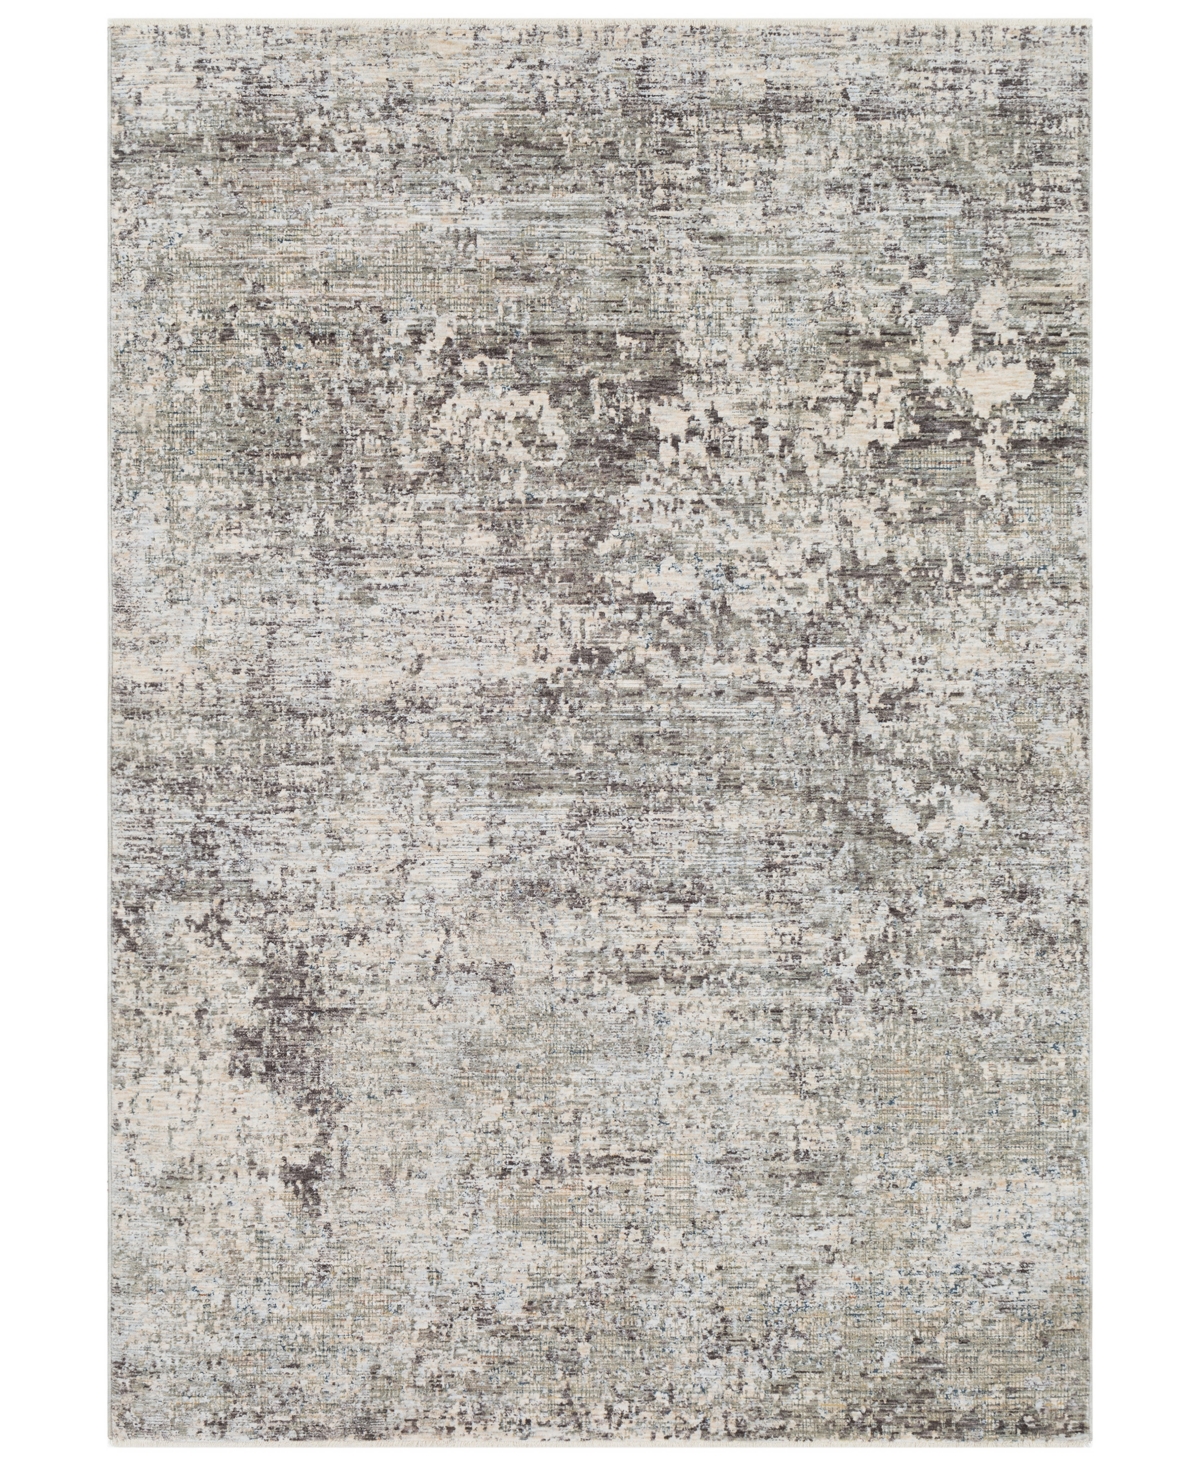 Surya Presidential Pdt-2303 Pale Blue 3'3in x 5' Area Rug - Pale Blue